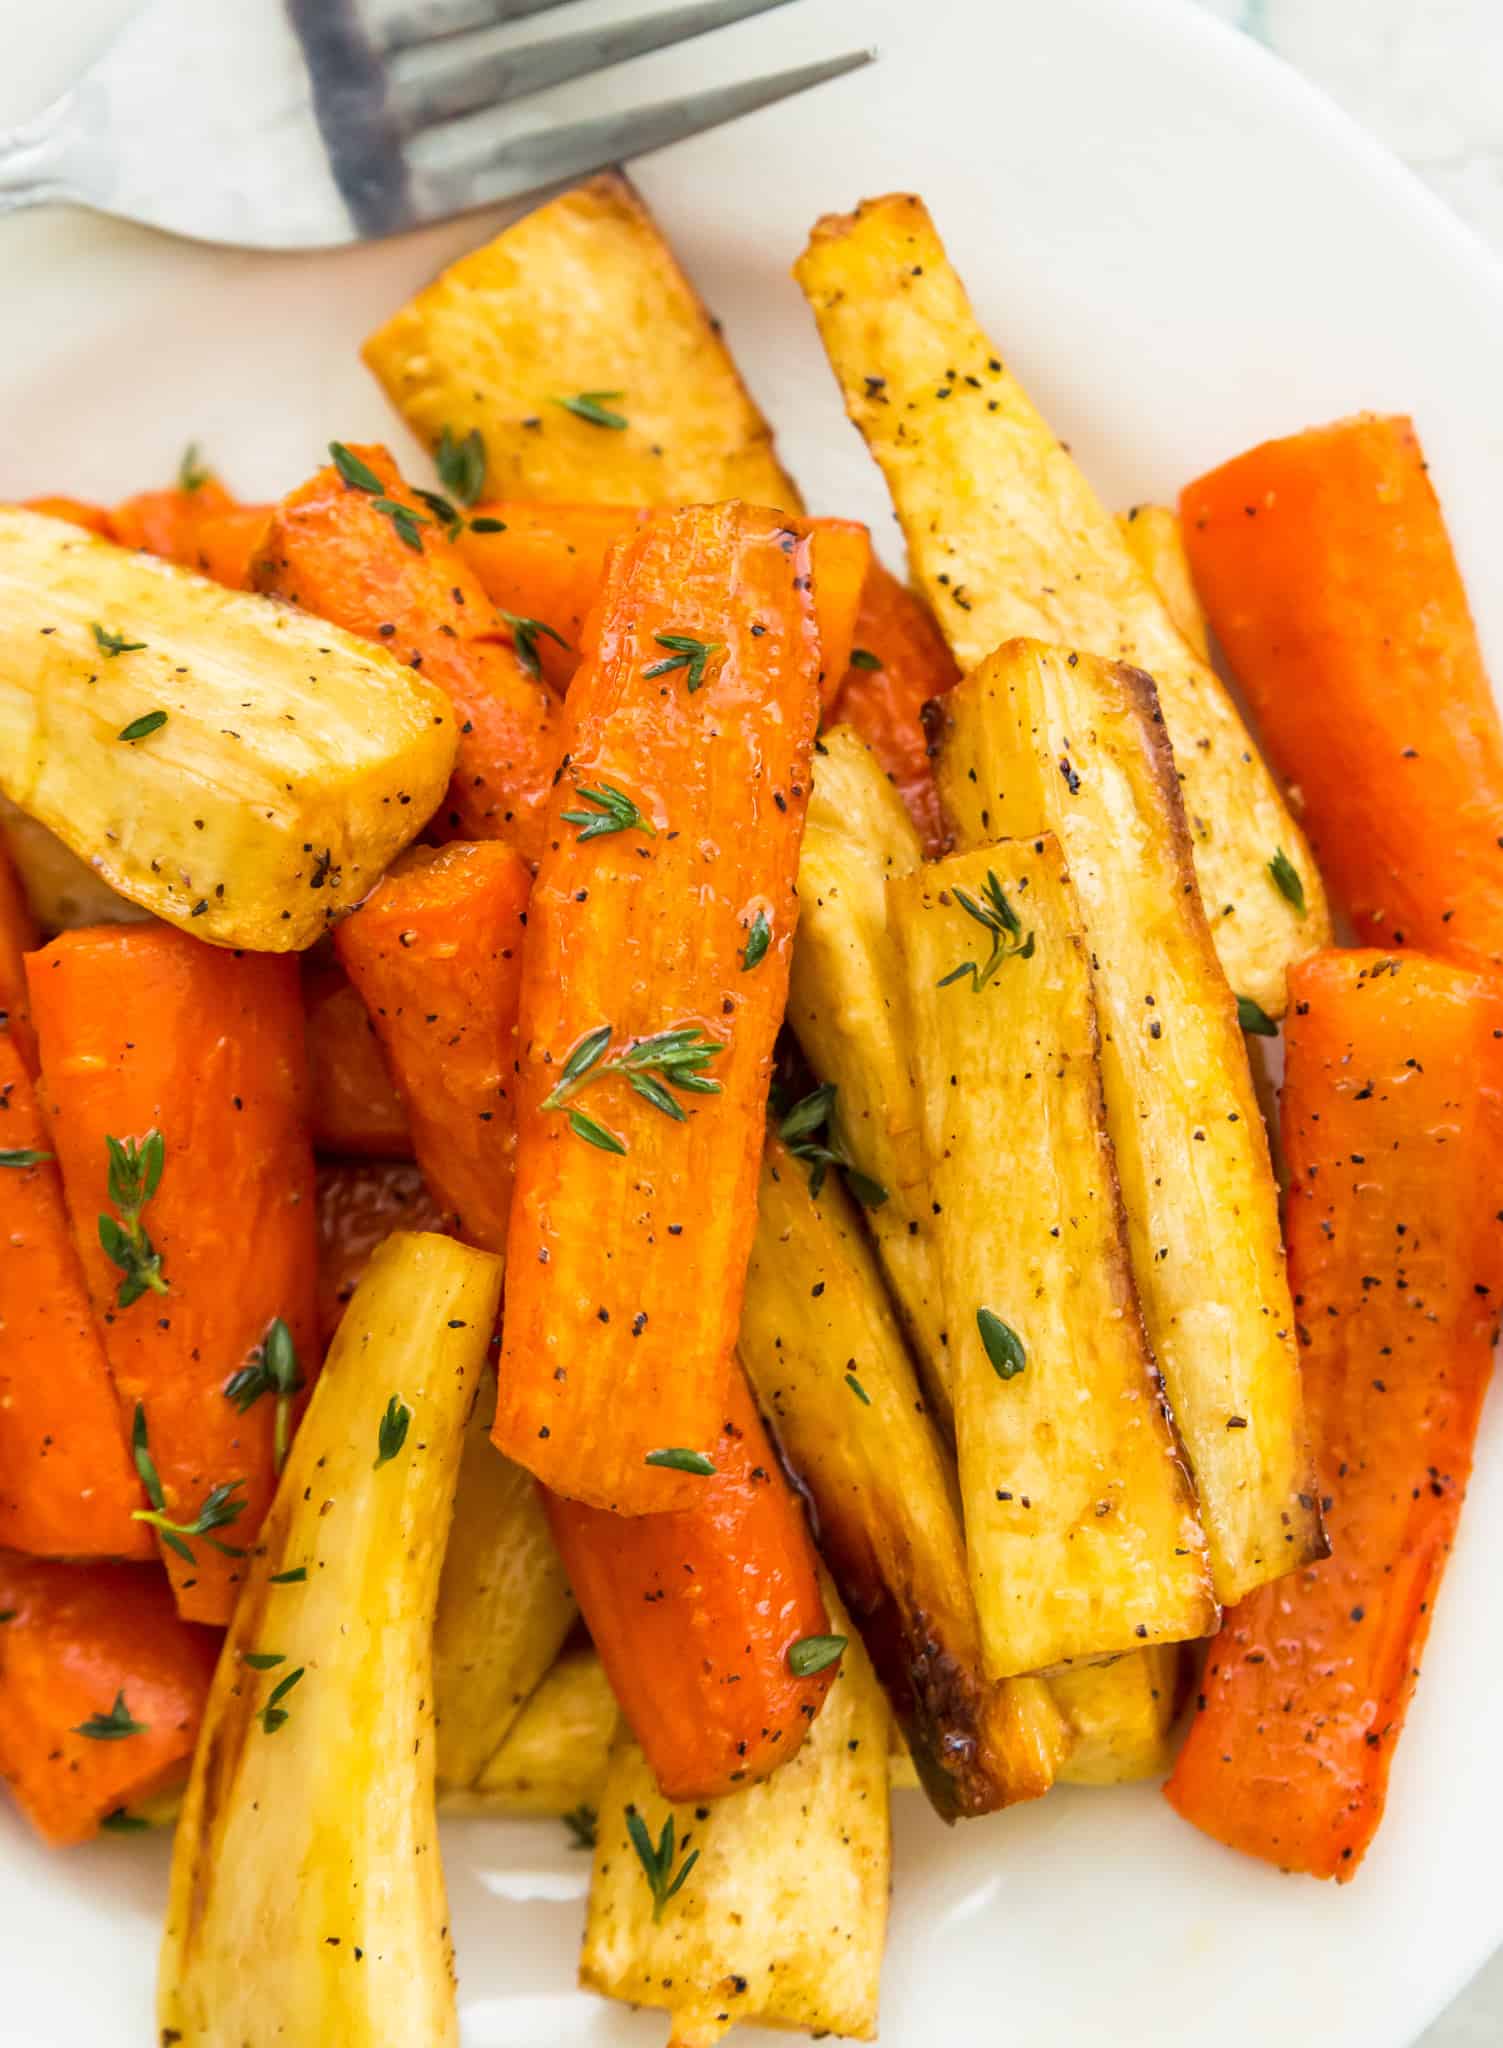 A plate full of honey glazed carrots and parsnips topped with fresh thyme.